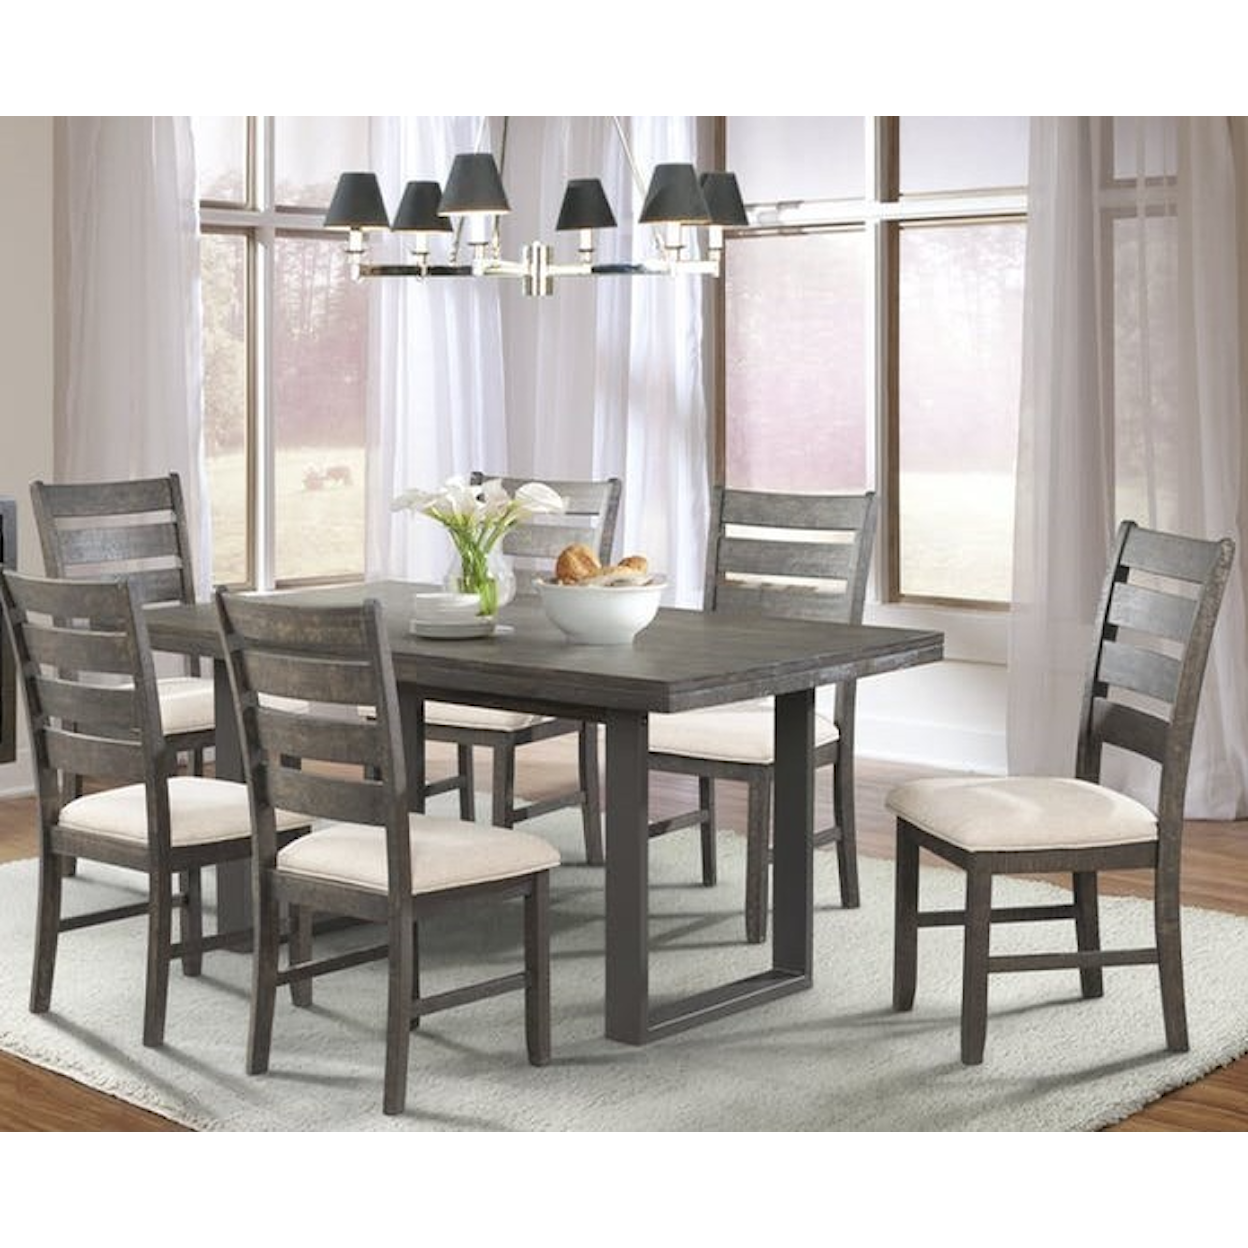 Elements International Sawyer Dining Set with Six Chairs